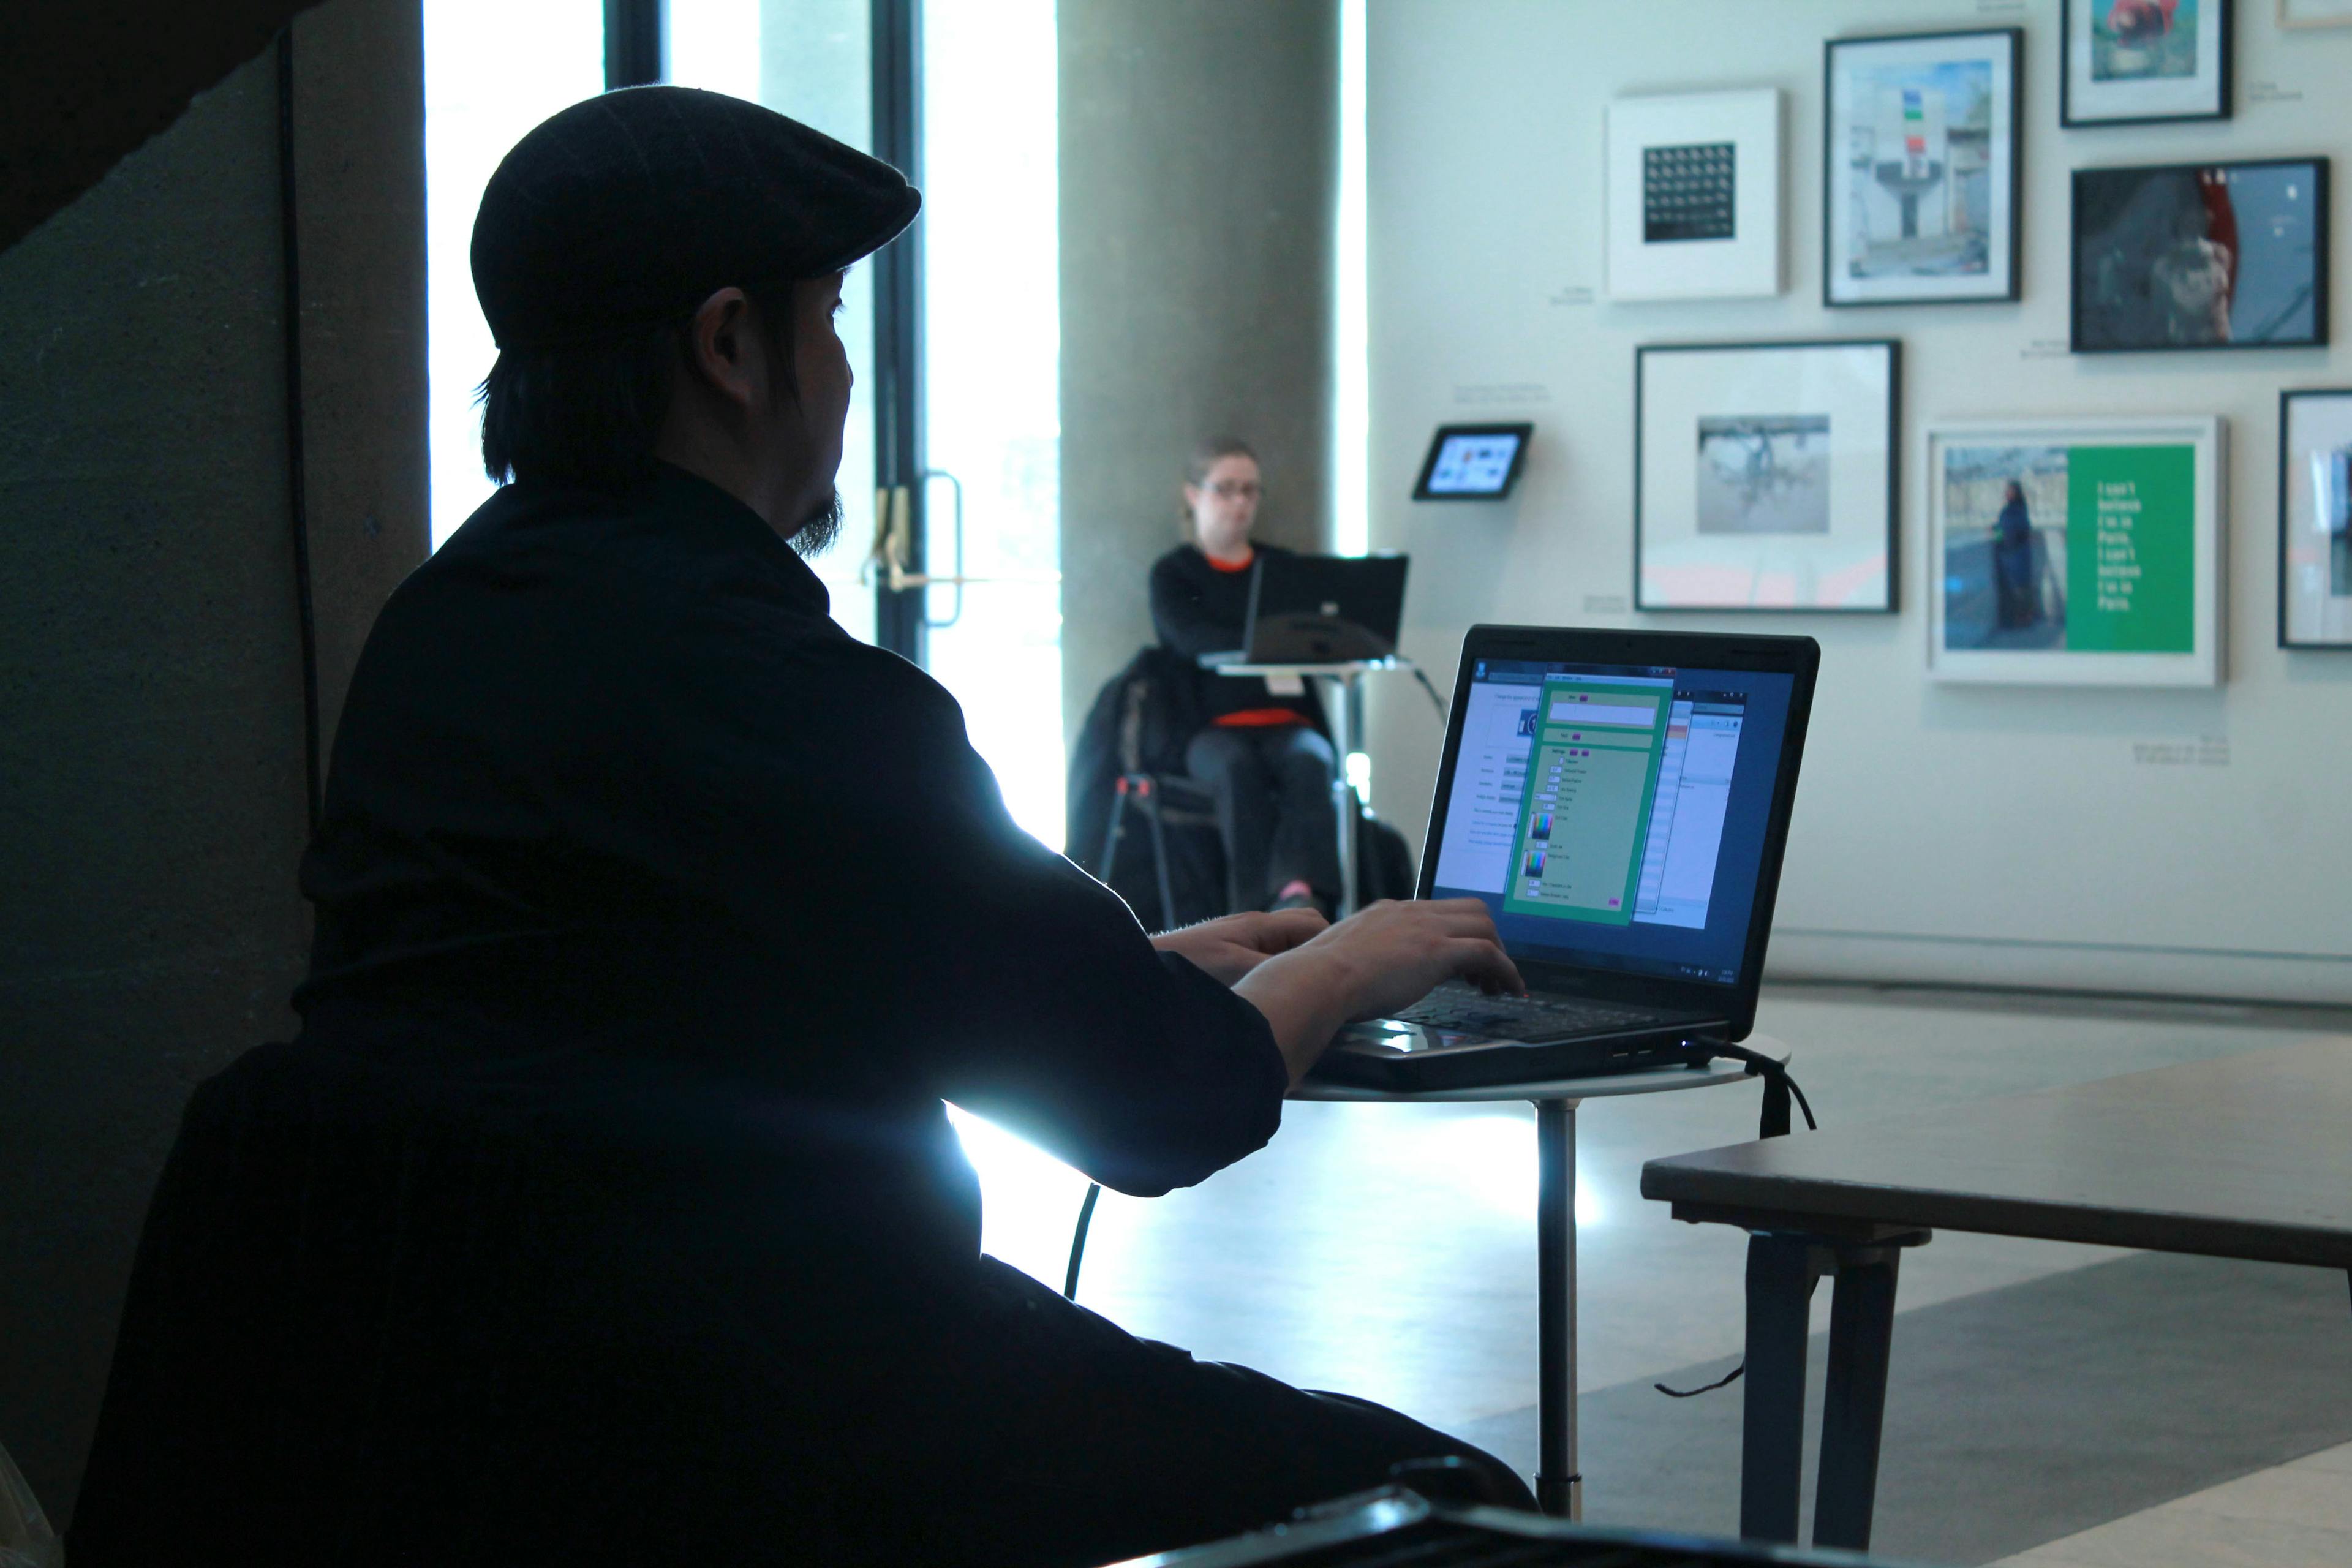 A person sits in front of a laptop at a small circular table. They face a white wall filled with framed artworks. Beside the framed artworks, another person sits with a laptop at a table.